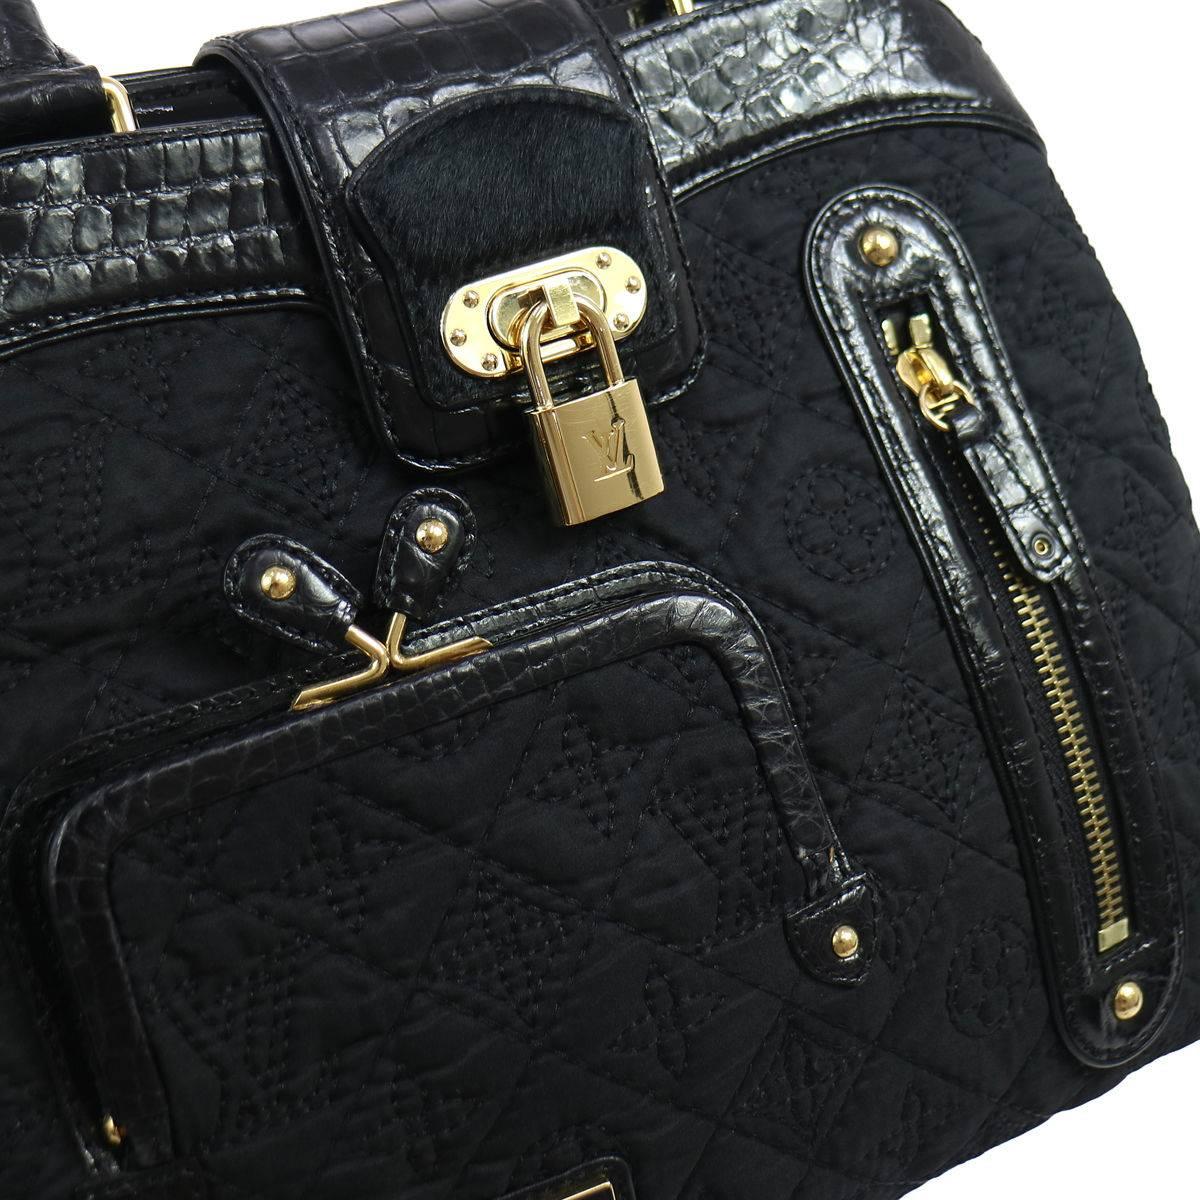 
Louis Vuitton Limited Edition Black Crocodile Leather Top Handle Satchel Evening Bag 
Leather (Crocodile)
Satin
Gold tone hardware
Leather liining
Zipper closure
Made in Italy
Date code RC0036
Handle drop 5